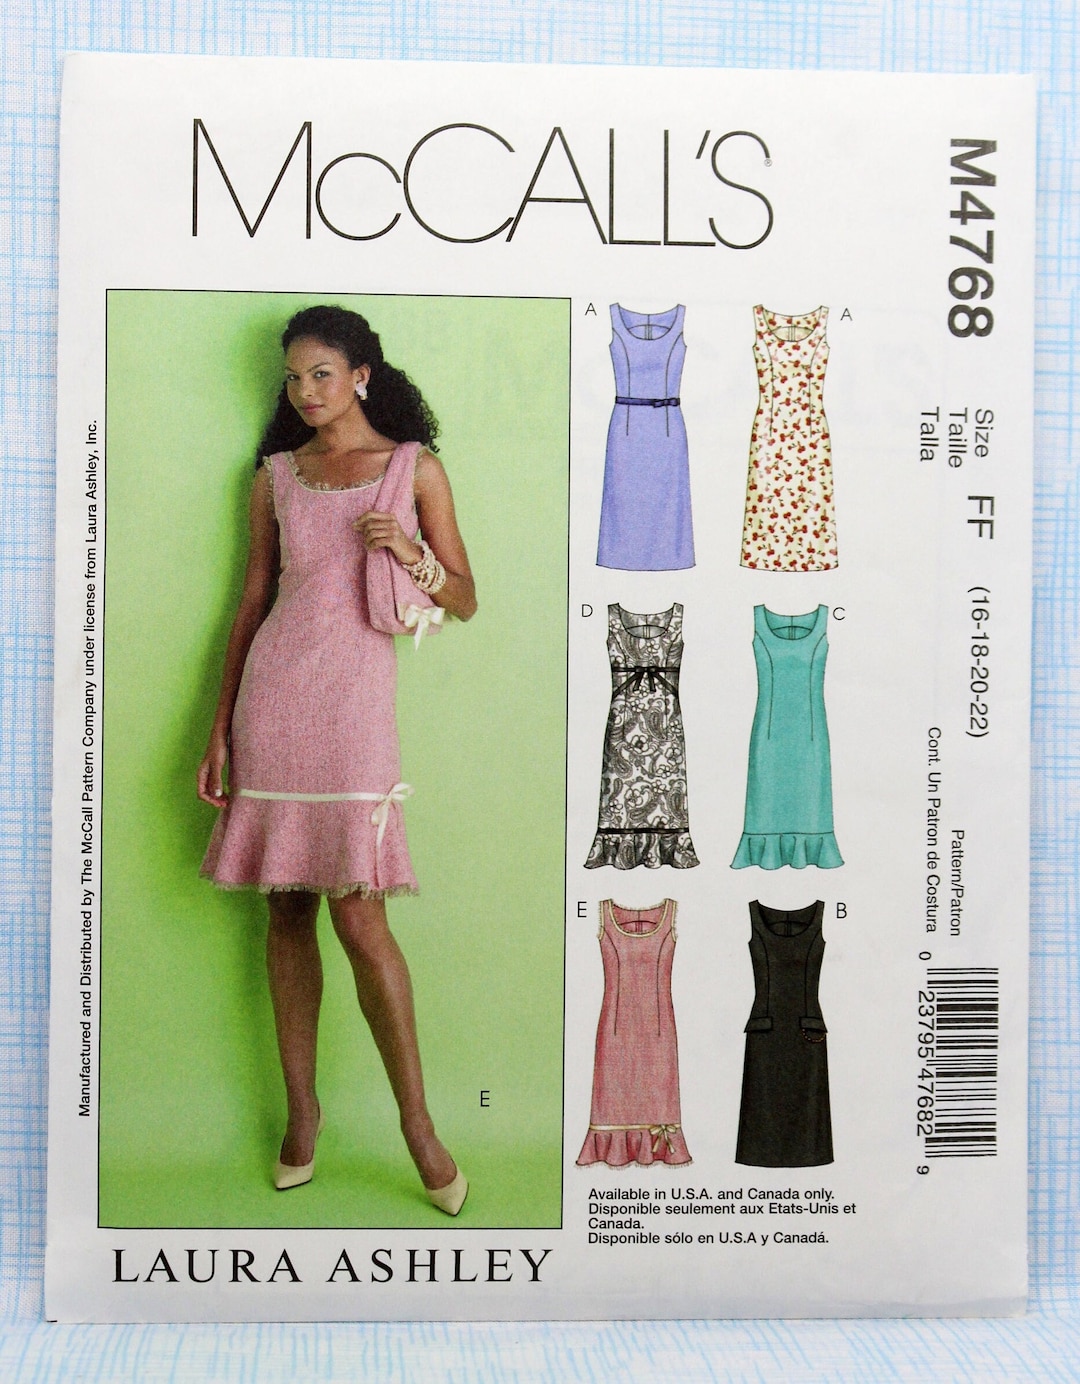 Mccall's Sewing Pattern 4768, Misses' Close-fitting Dresses, Uncut/ff,  Misses' Size 16 18 20 22, Laura Ashley Dress Pattern, Mccall's M4768 -   Canada